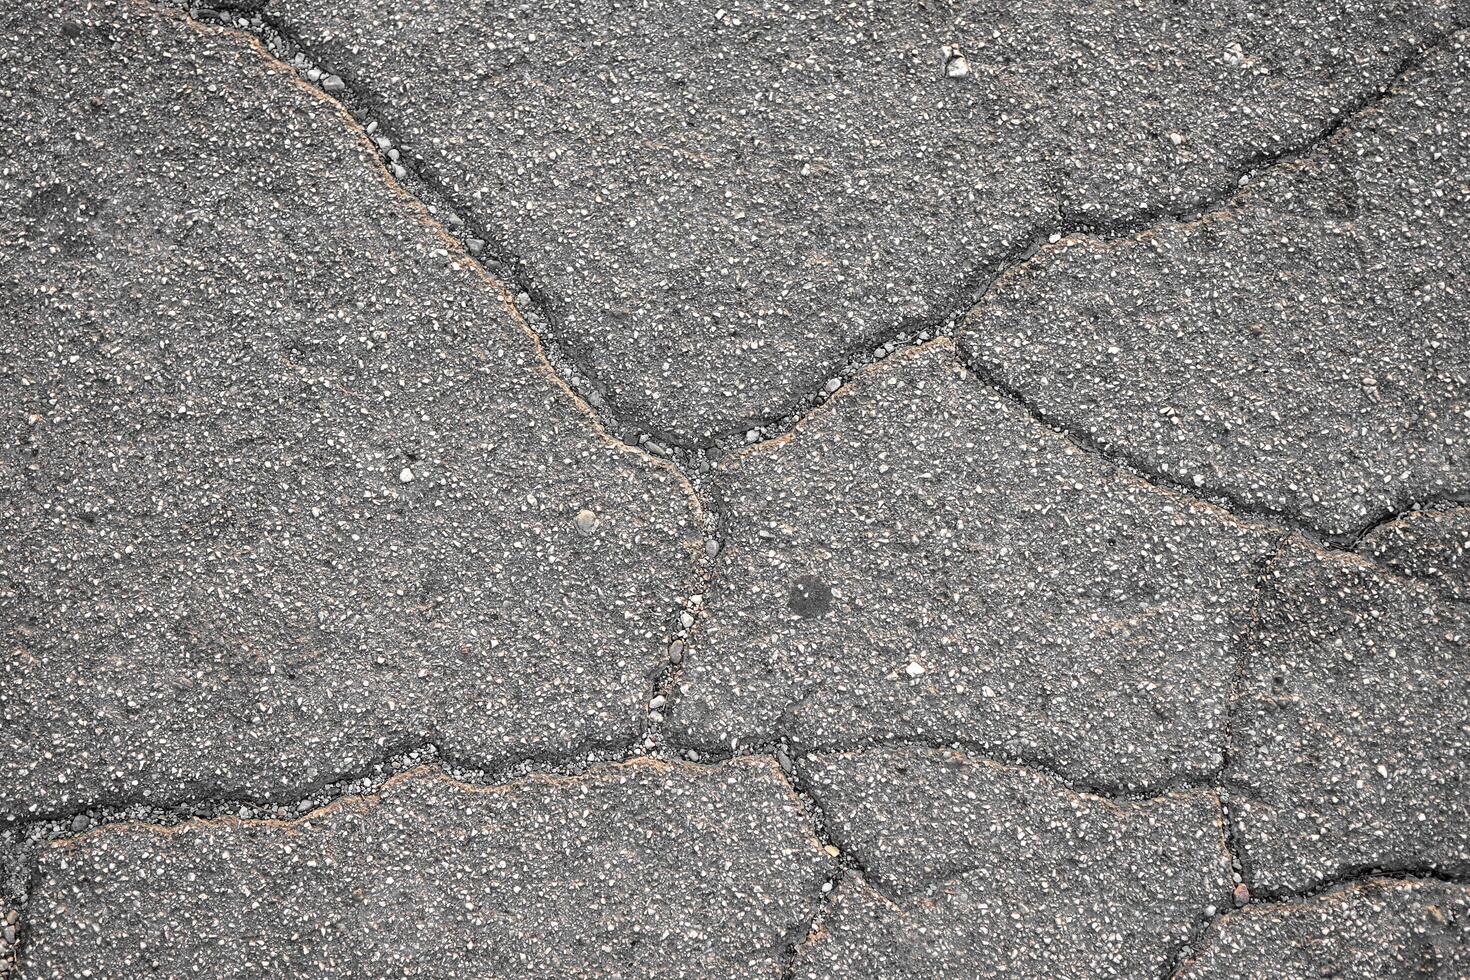 Concrete background with rough deep crack. Gray back. Grunge photo